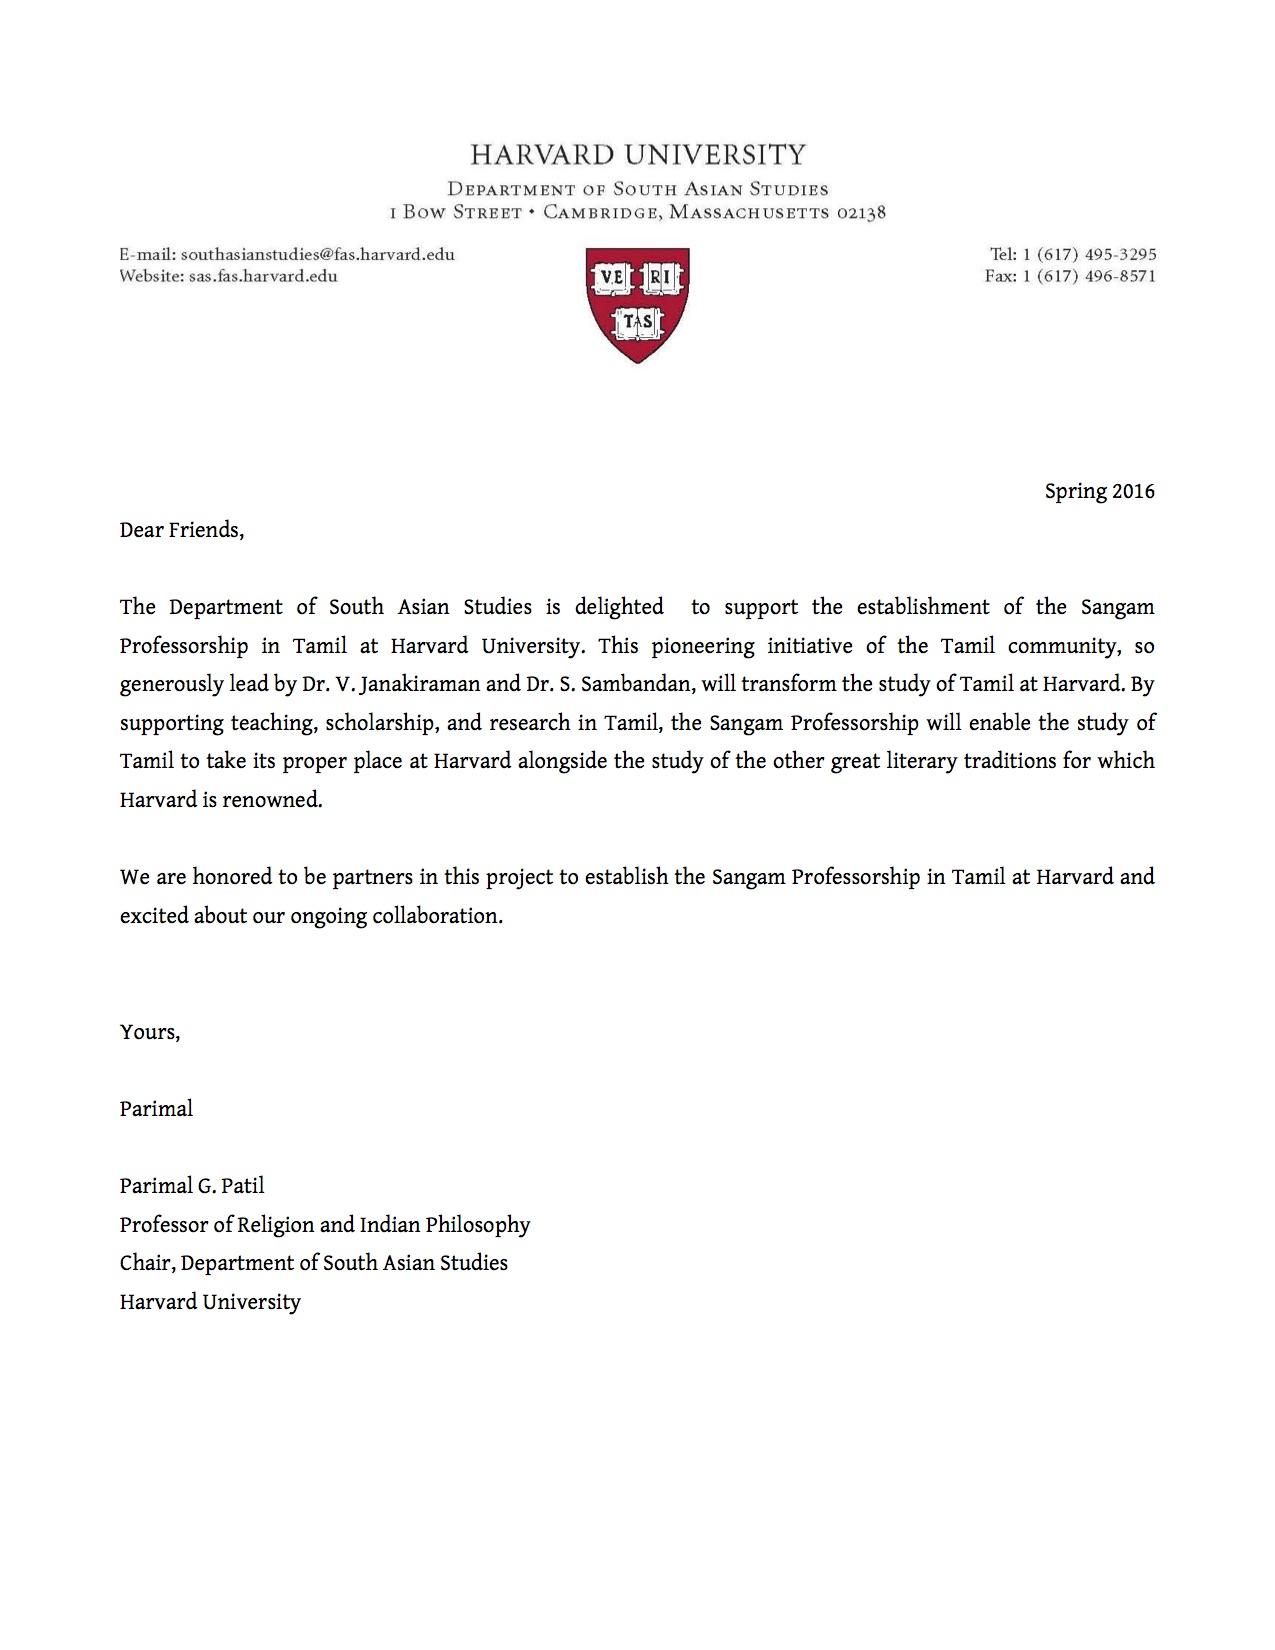 Letter from Parimal G. Patil, Chair, Department of South Asian Studies